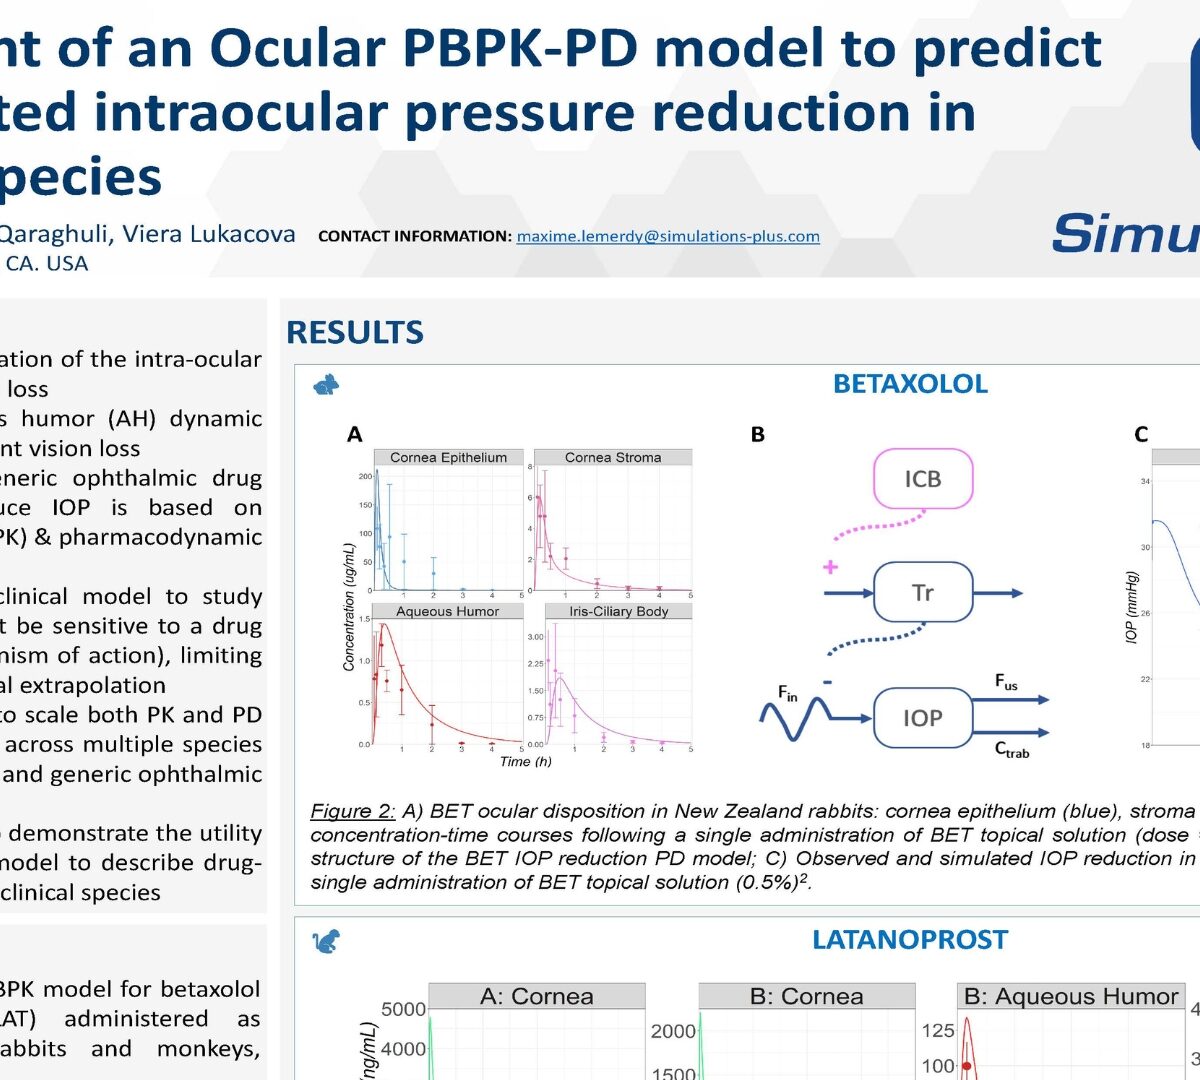 Development of an Ocular PBPK-PD model to predict drug-mediated intraocular pressure reduction in preclinical species